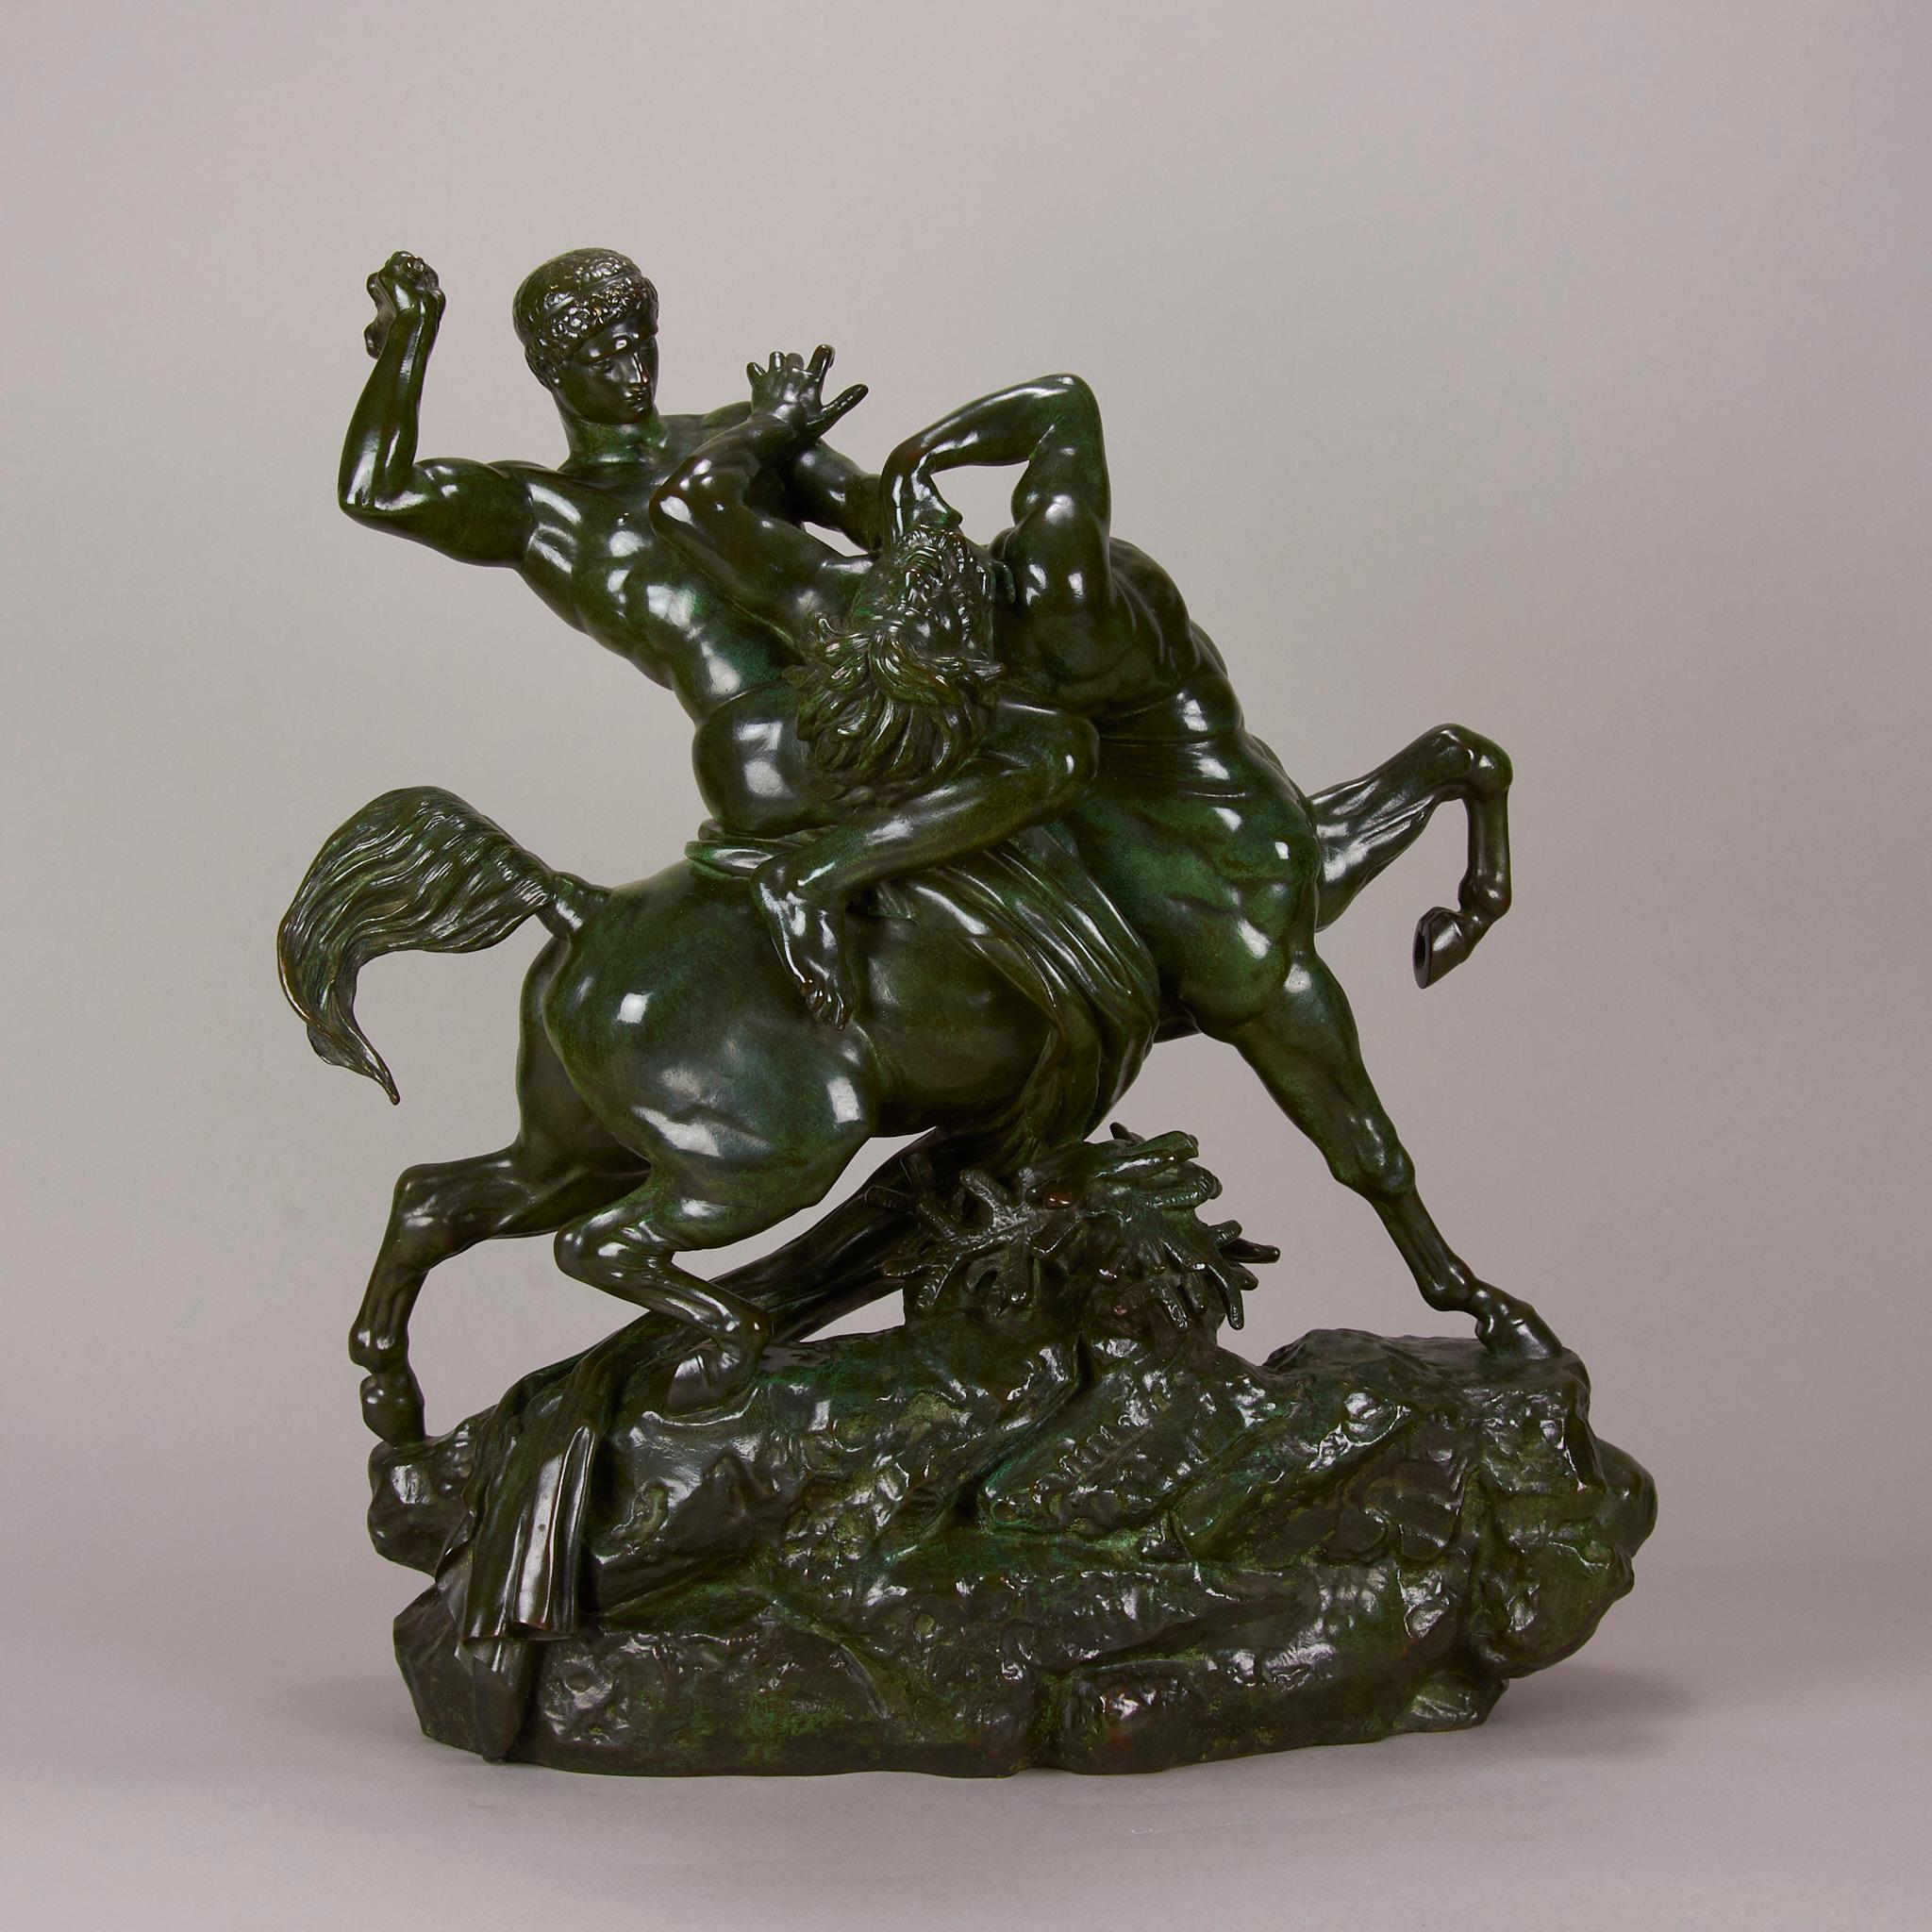 Magnificent and very impressive bronze group entitled ‘Theseus and the Centaur’ by Antoine L Barye. The bronze with rich autumnal green, black, brown and orange patination and excellent surface detail. Raised on a naturalistic bronze plinth and